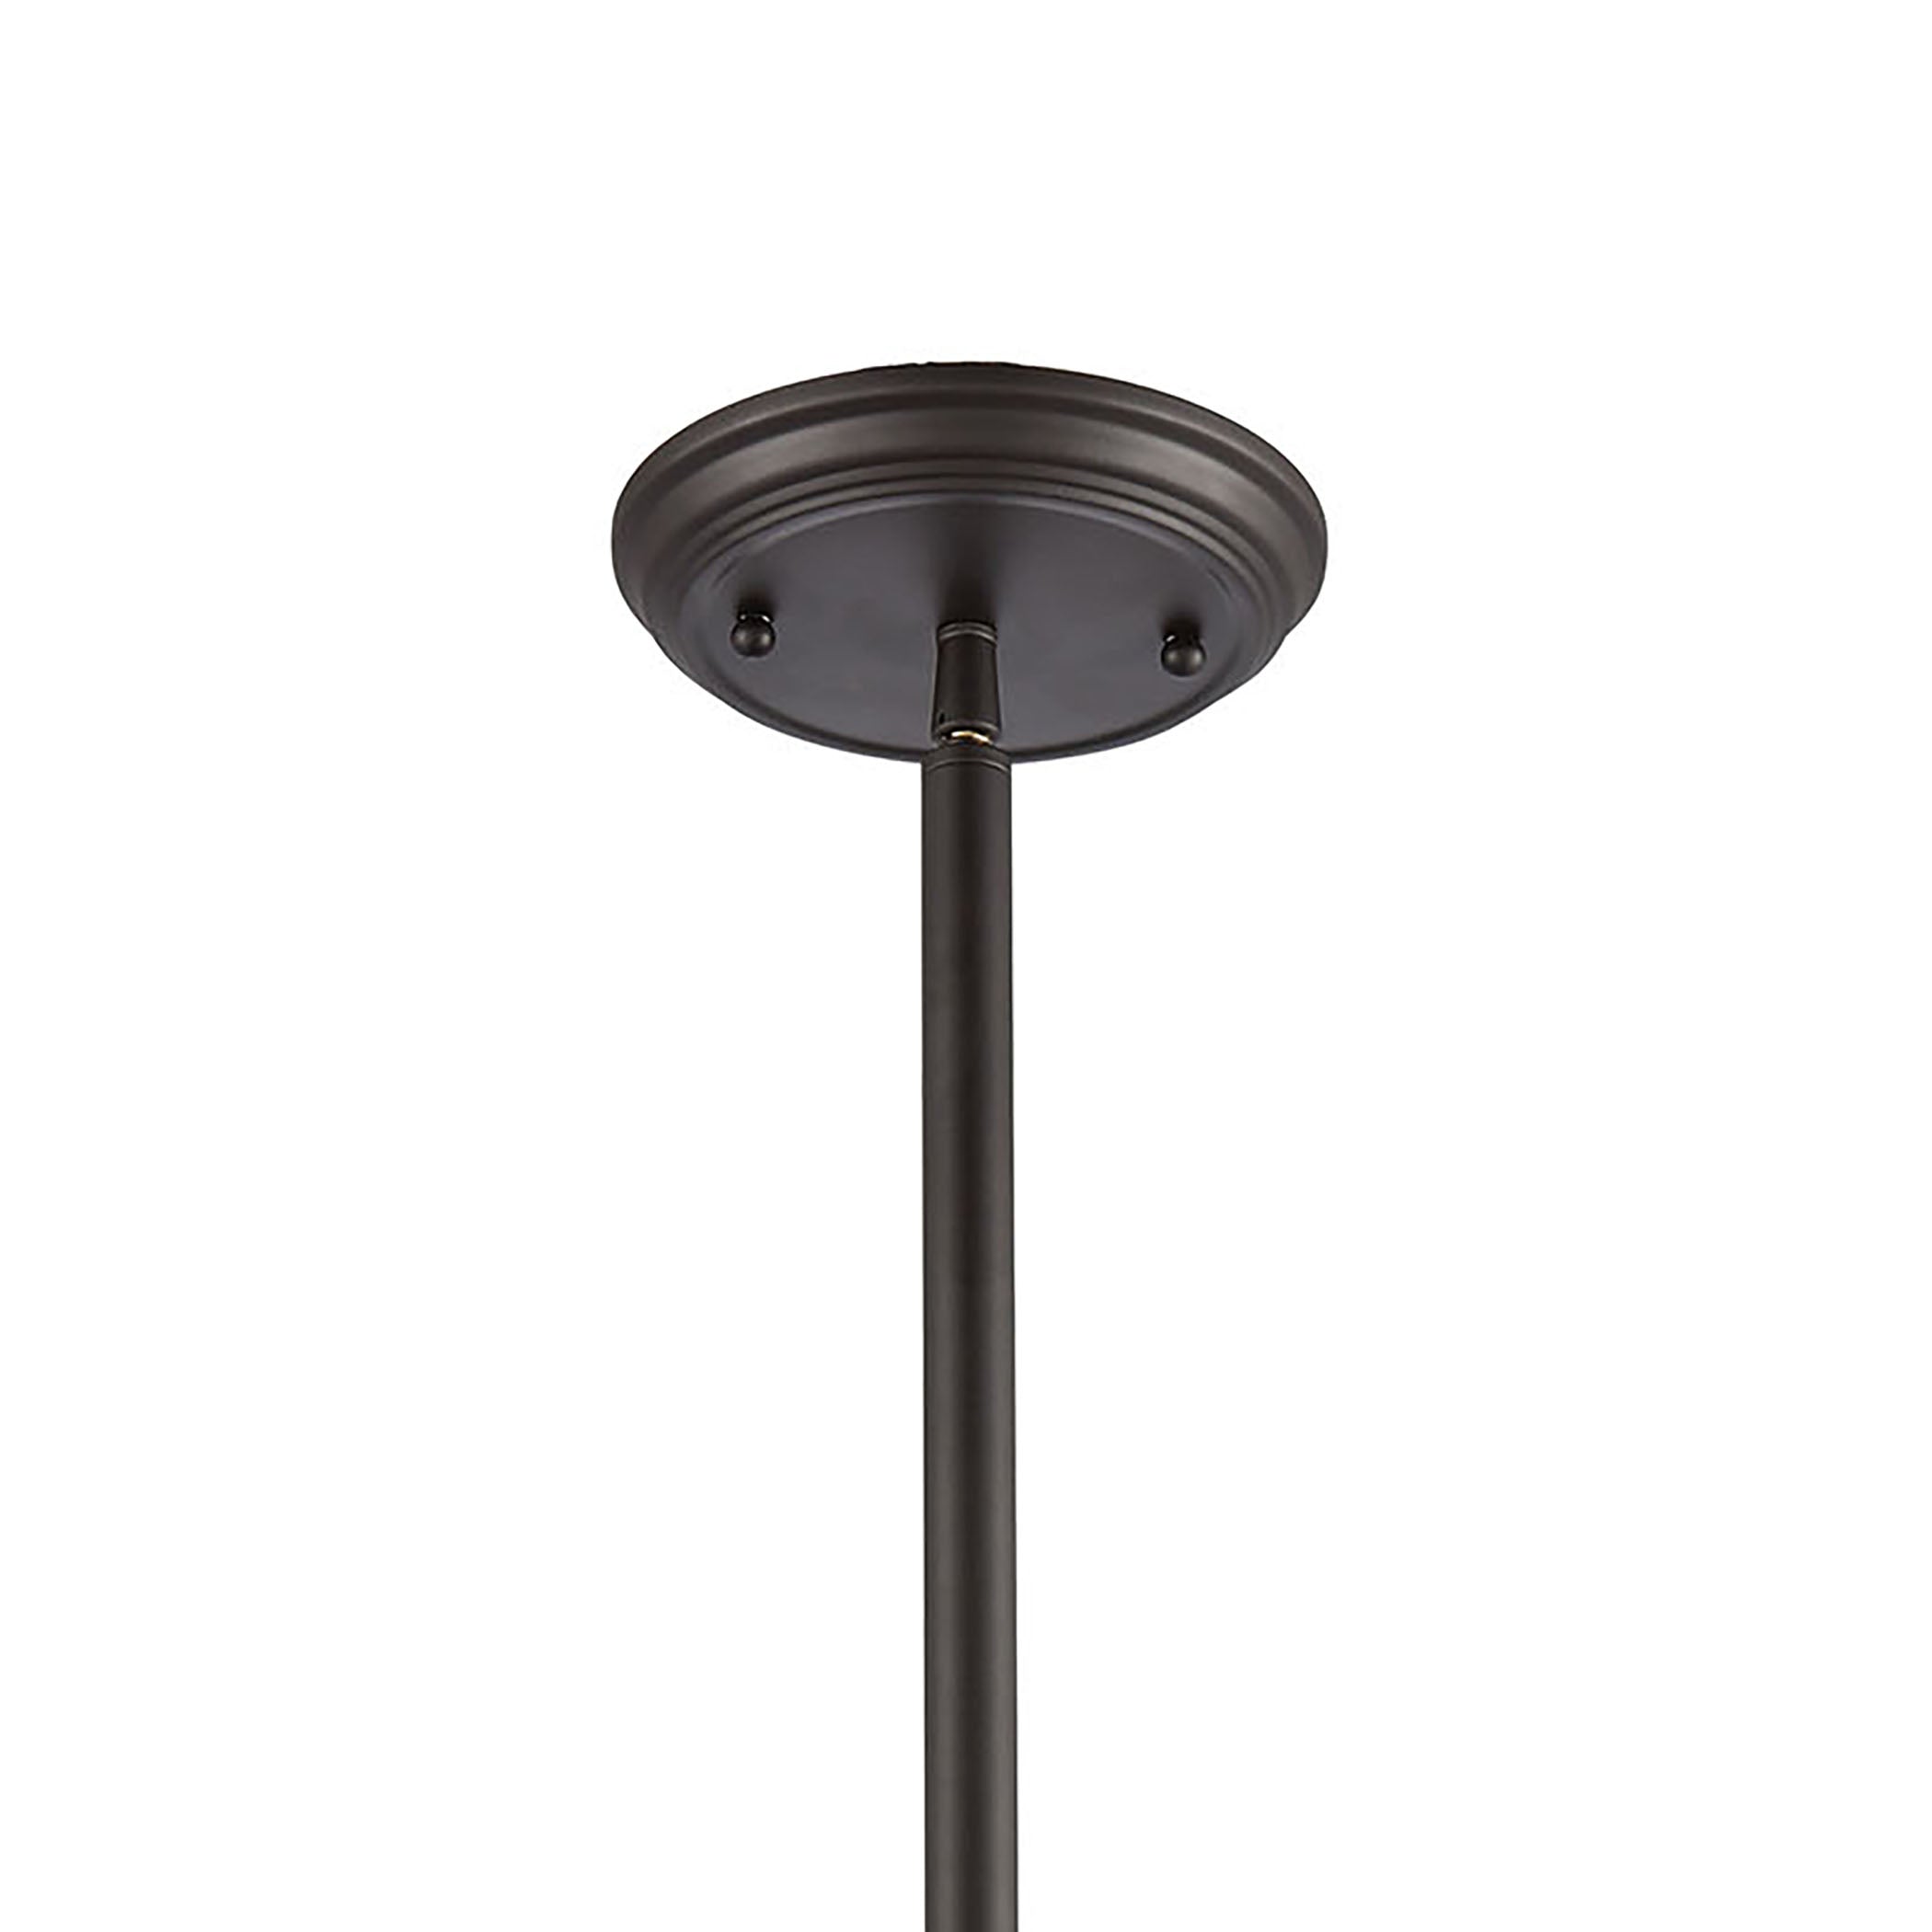 ELK Lighting 66614-1 Chadwick 1-Light Pendant in Oil Rubbed Bronze with Metal and Frosted Glass